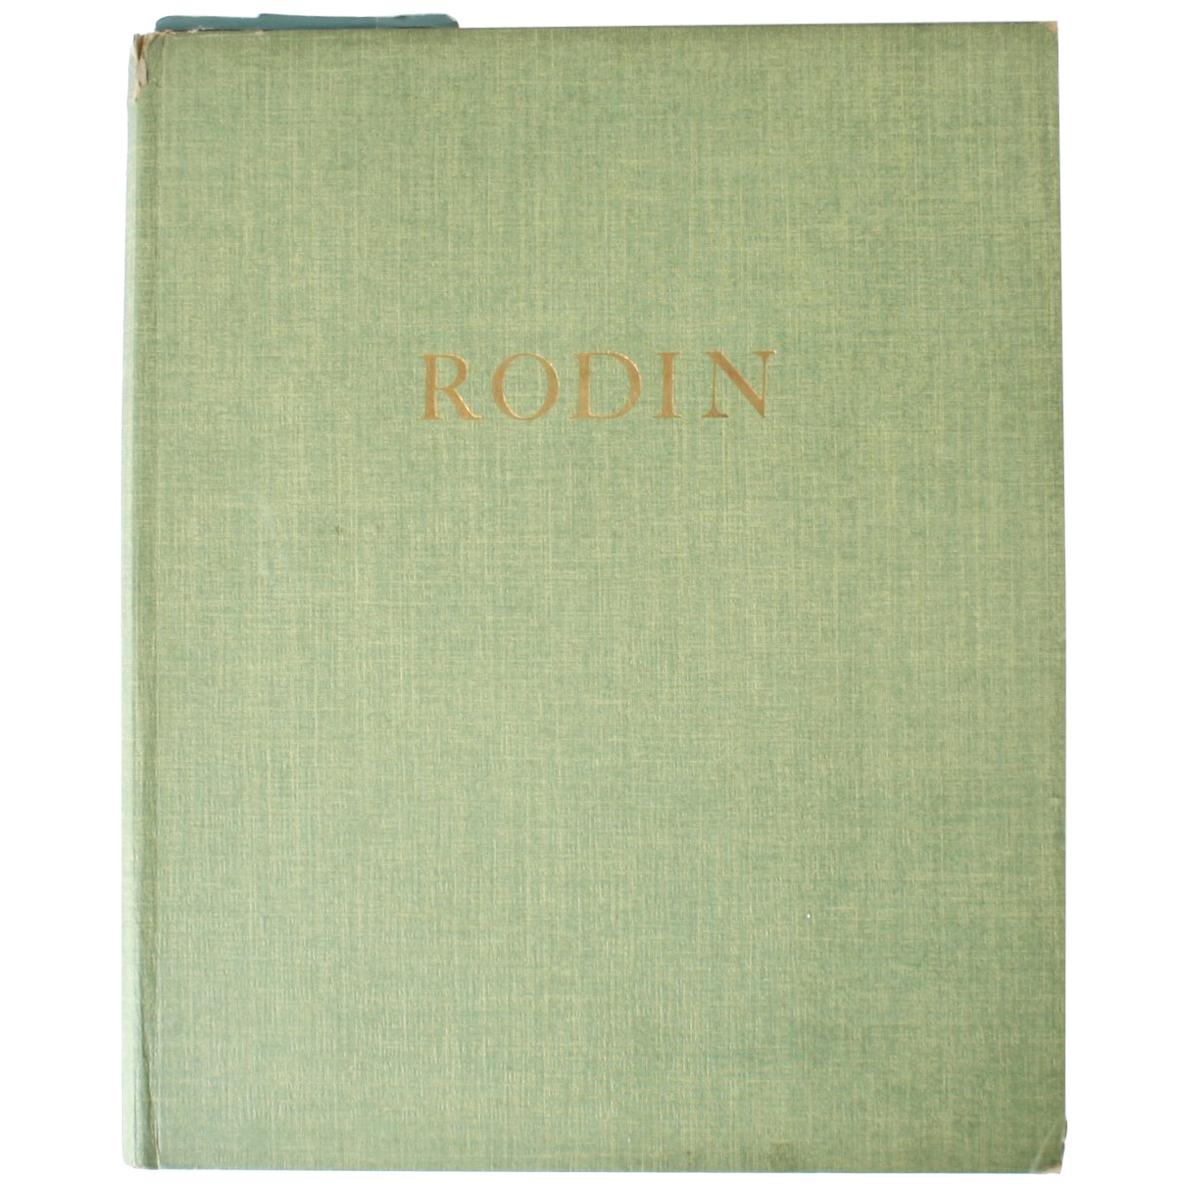 Auguste Rodin by Philip R Adams, First Edition